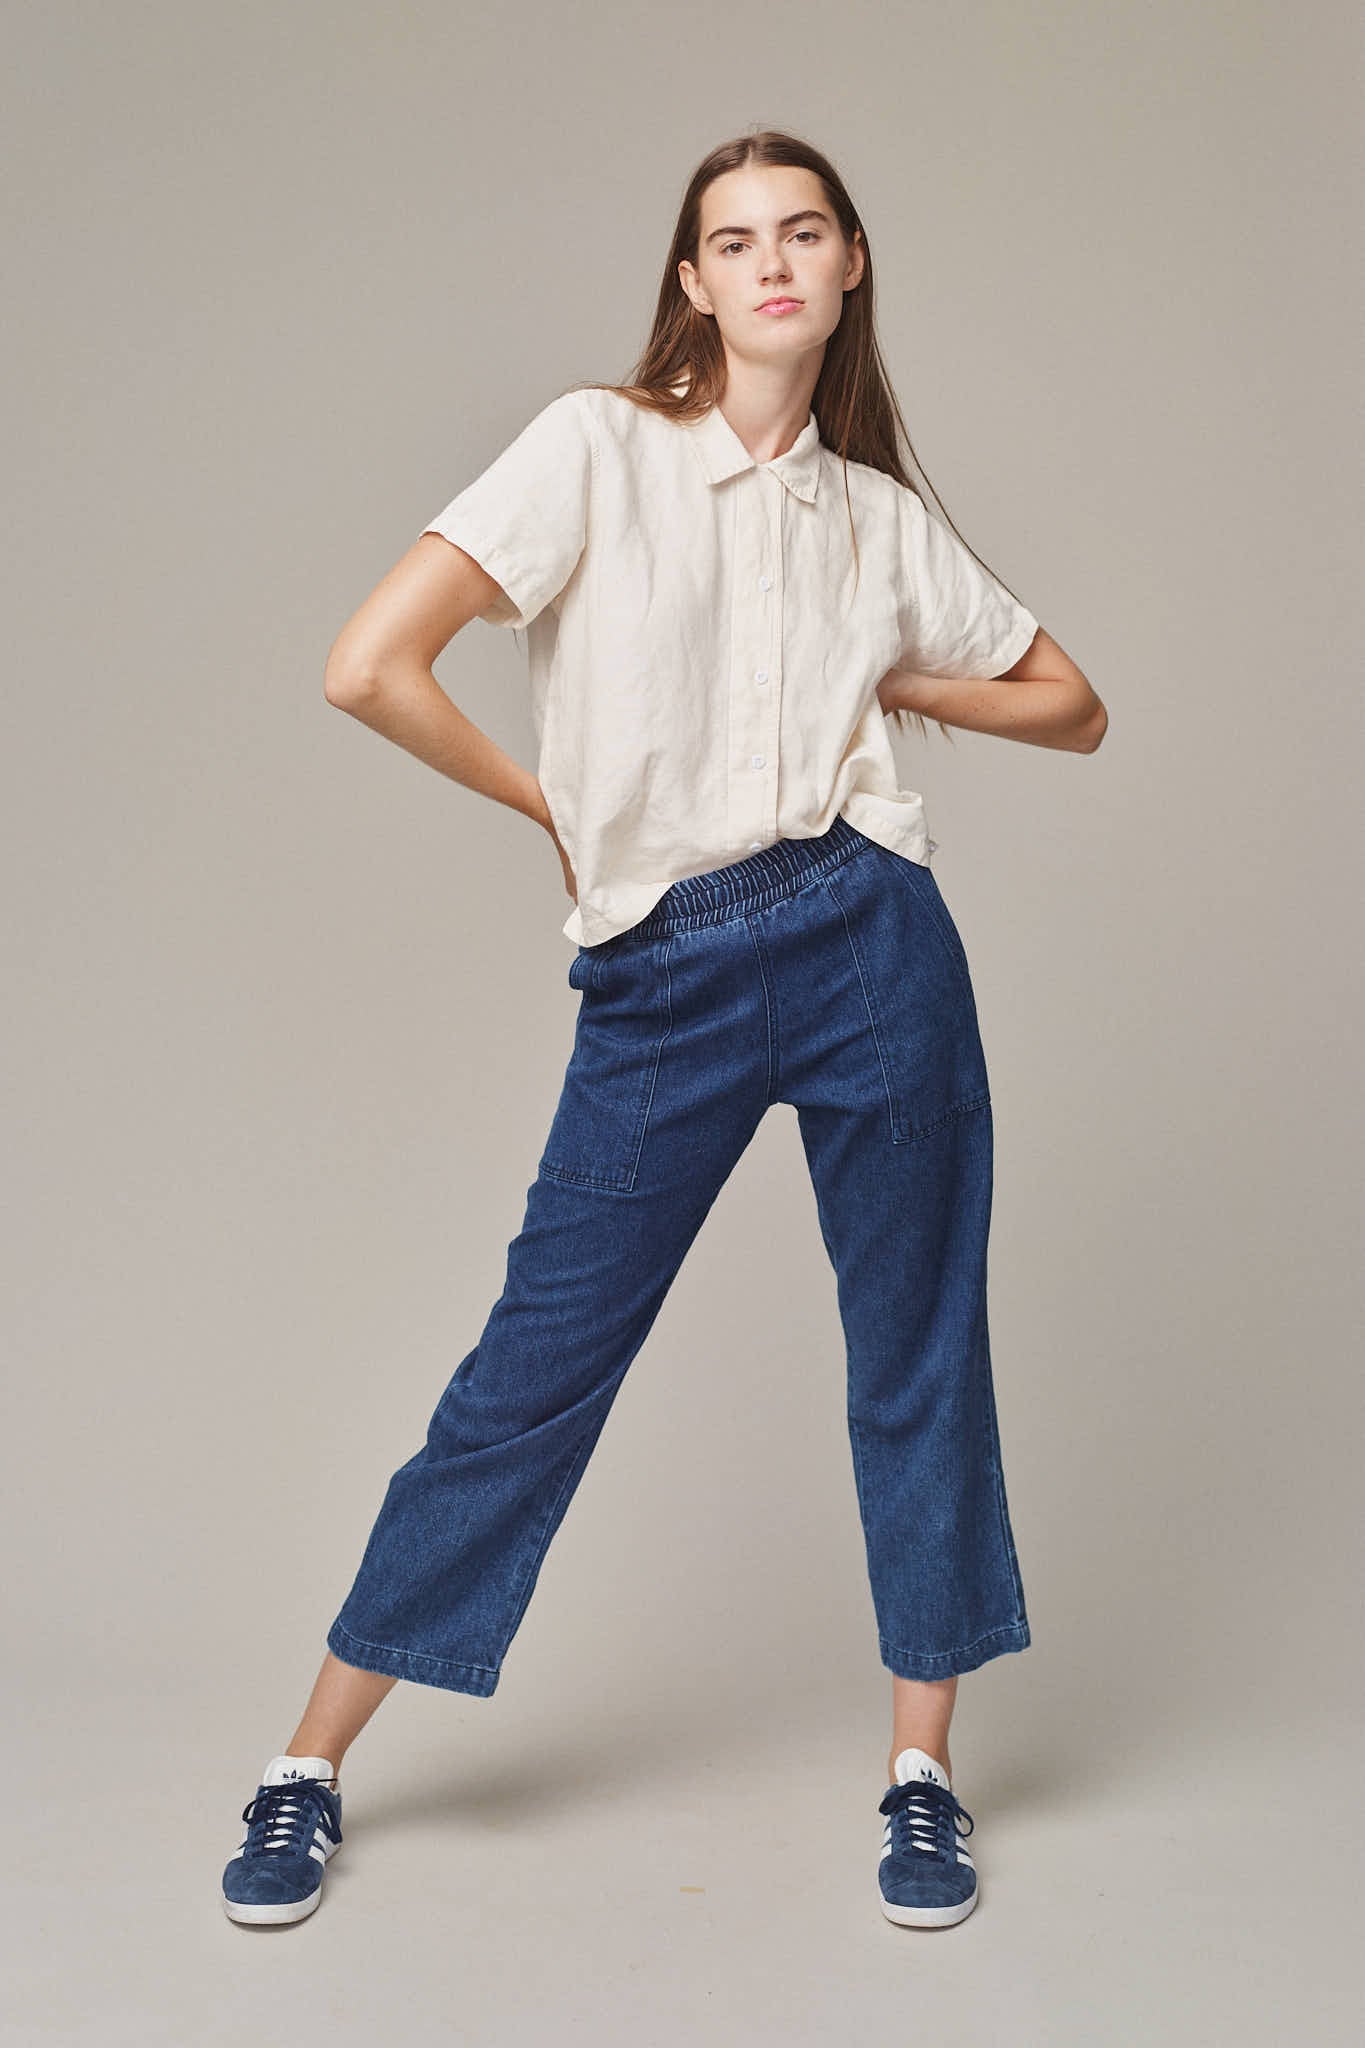 USA made hemp denim pants with high waist creates a flattering shape while the adjustable hidden drawcord and relaxed fit through the hip + thigh makes these a super comfortable wear.